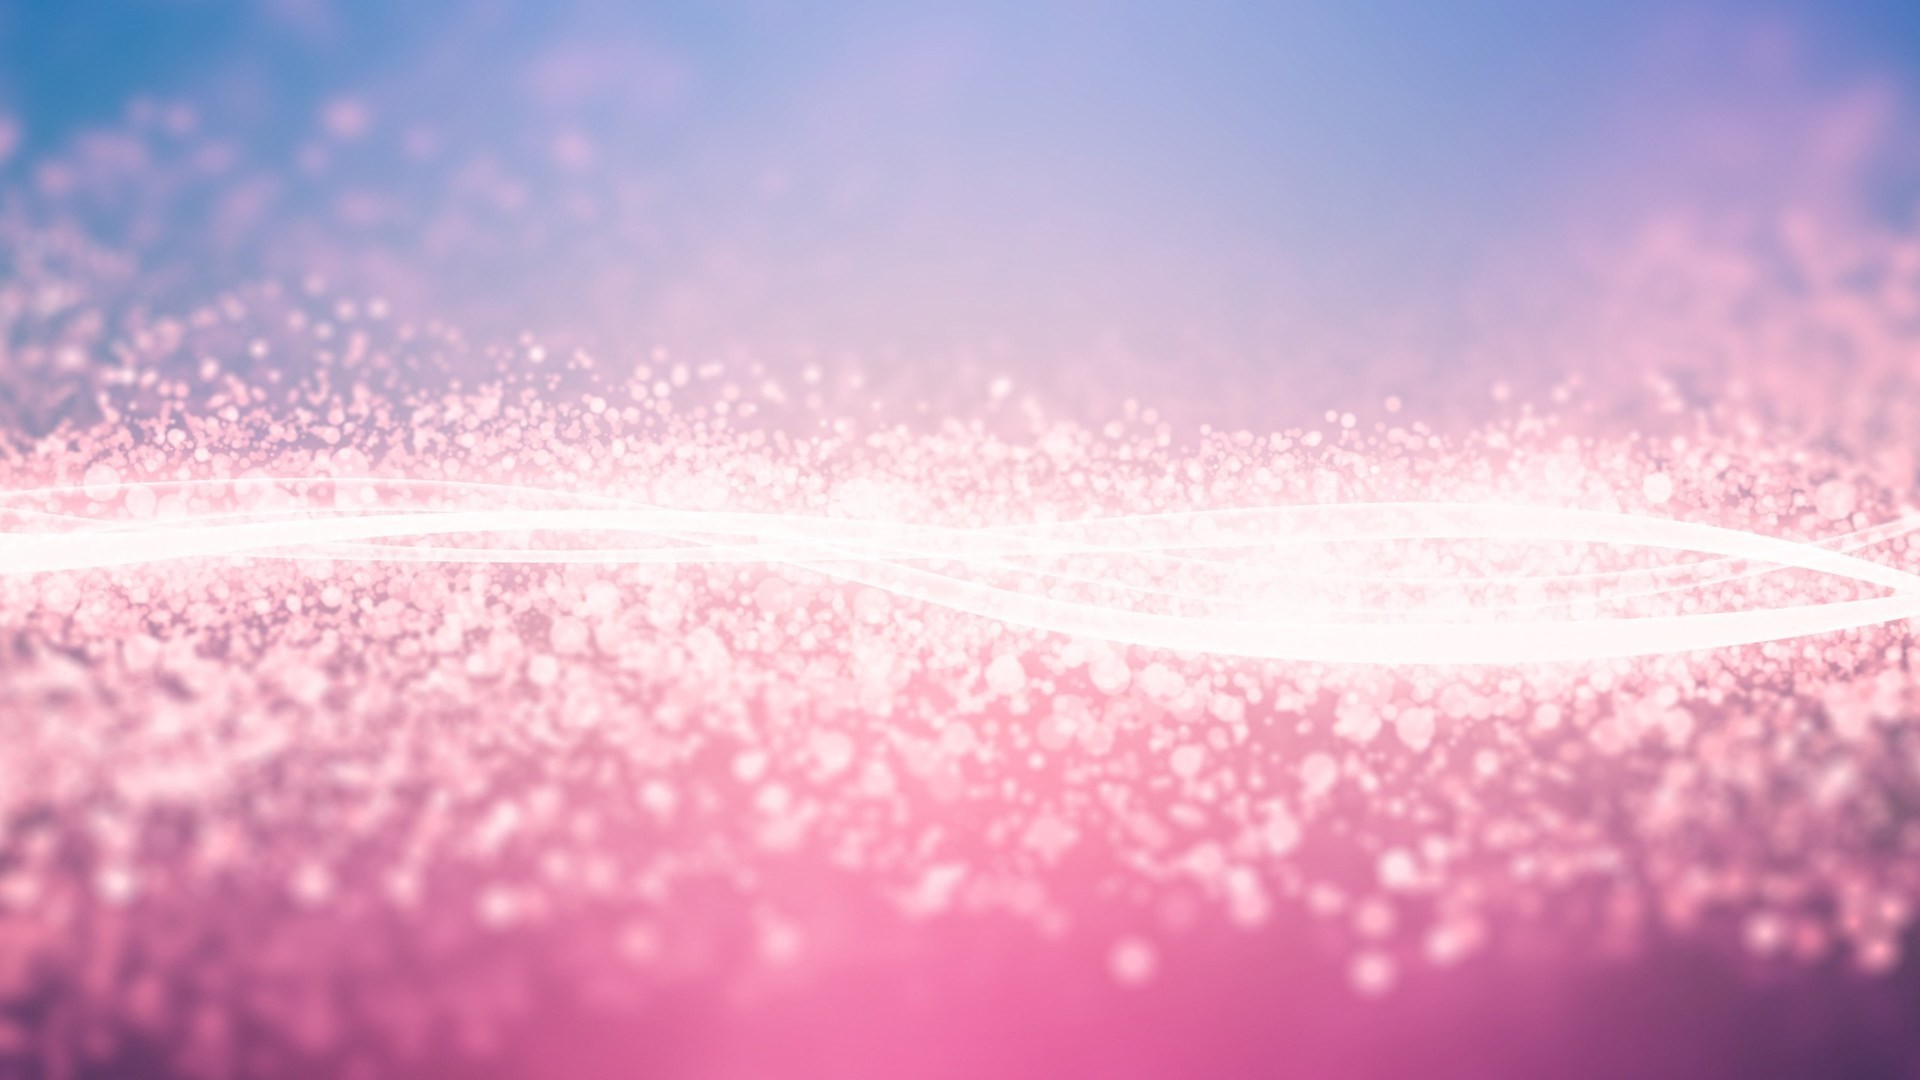 1920x1080 pictures pink glitter wallpaper hd | ololoshenka | Pinterest | Pink glitter  wallpaper